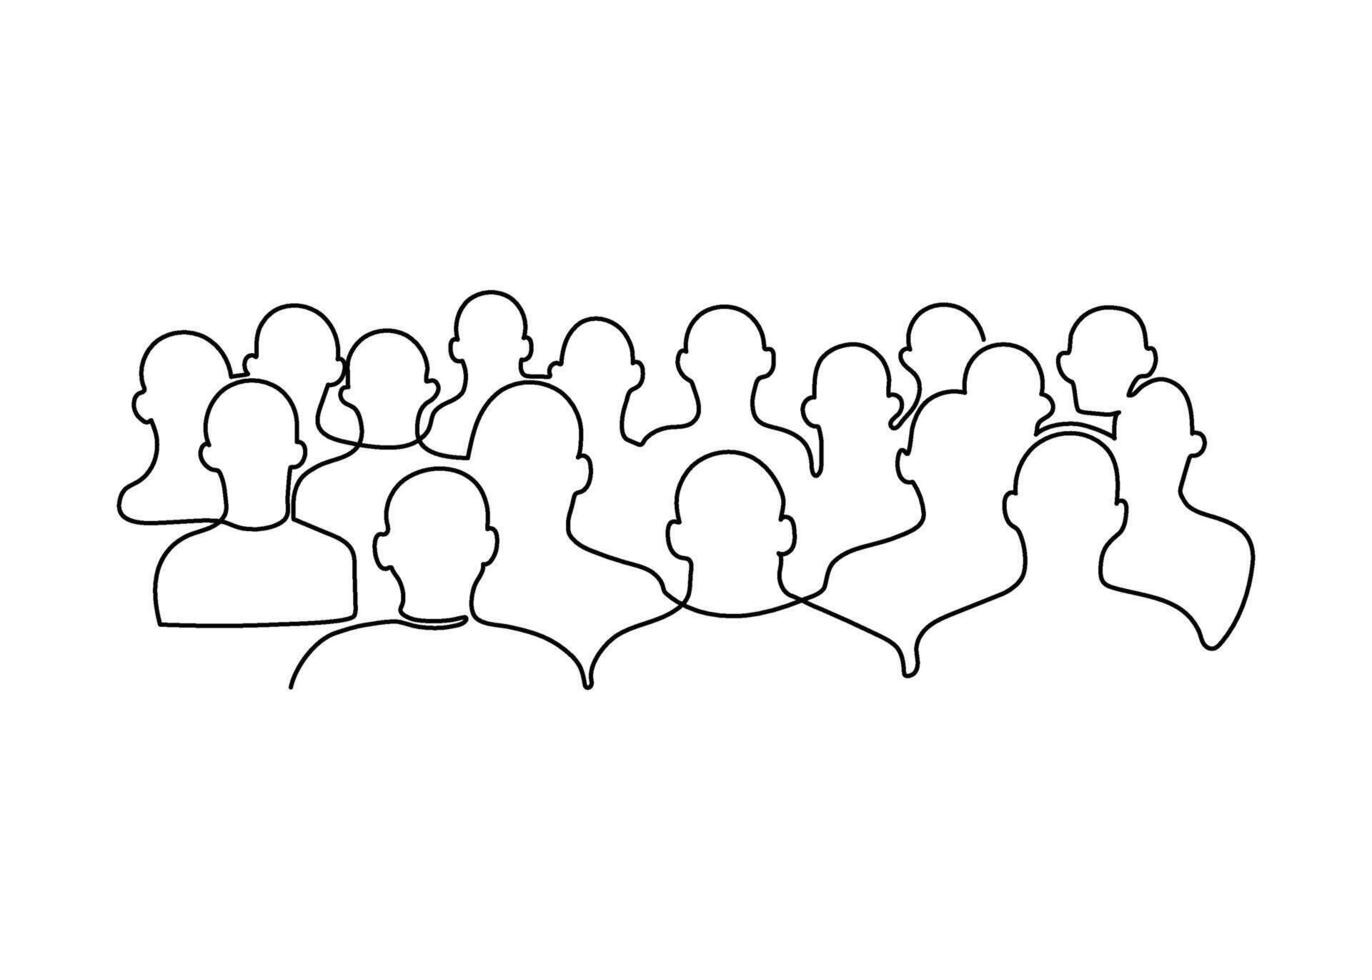 Audience, auditorium with sit people spectator back, continuous one line drawing. Business training, conference, education people mass. Students silhouette, lecture. single outline illustration vector